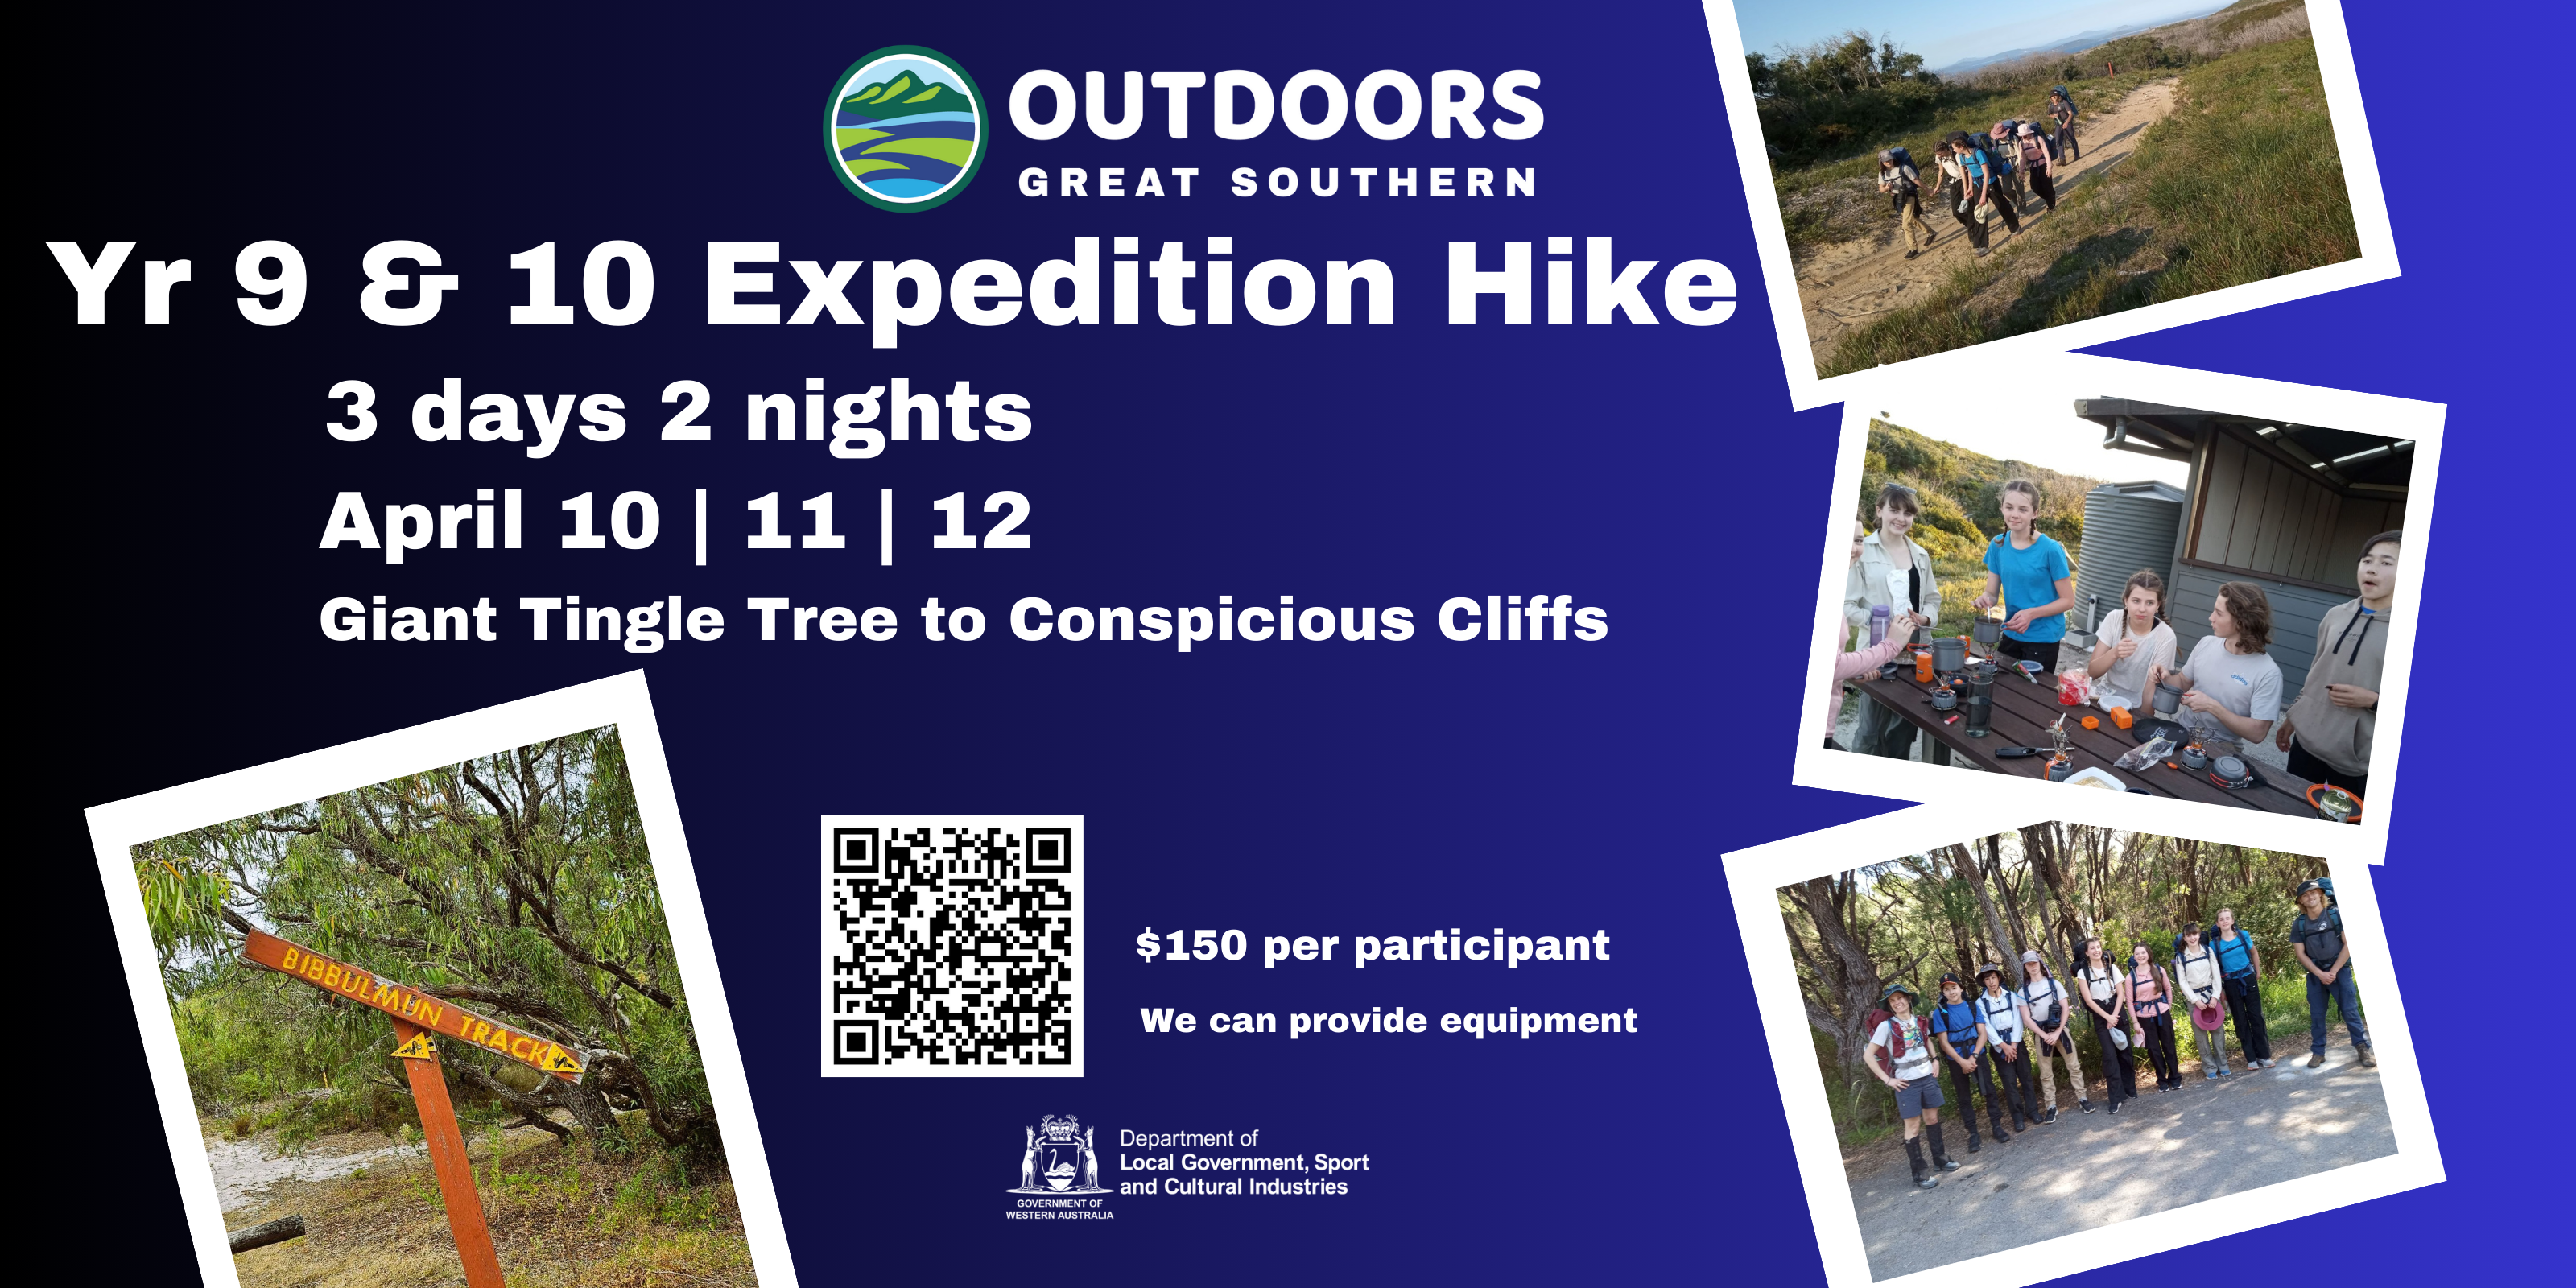 Yr 9/10 Expedition Hike April 10/11/12